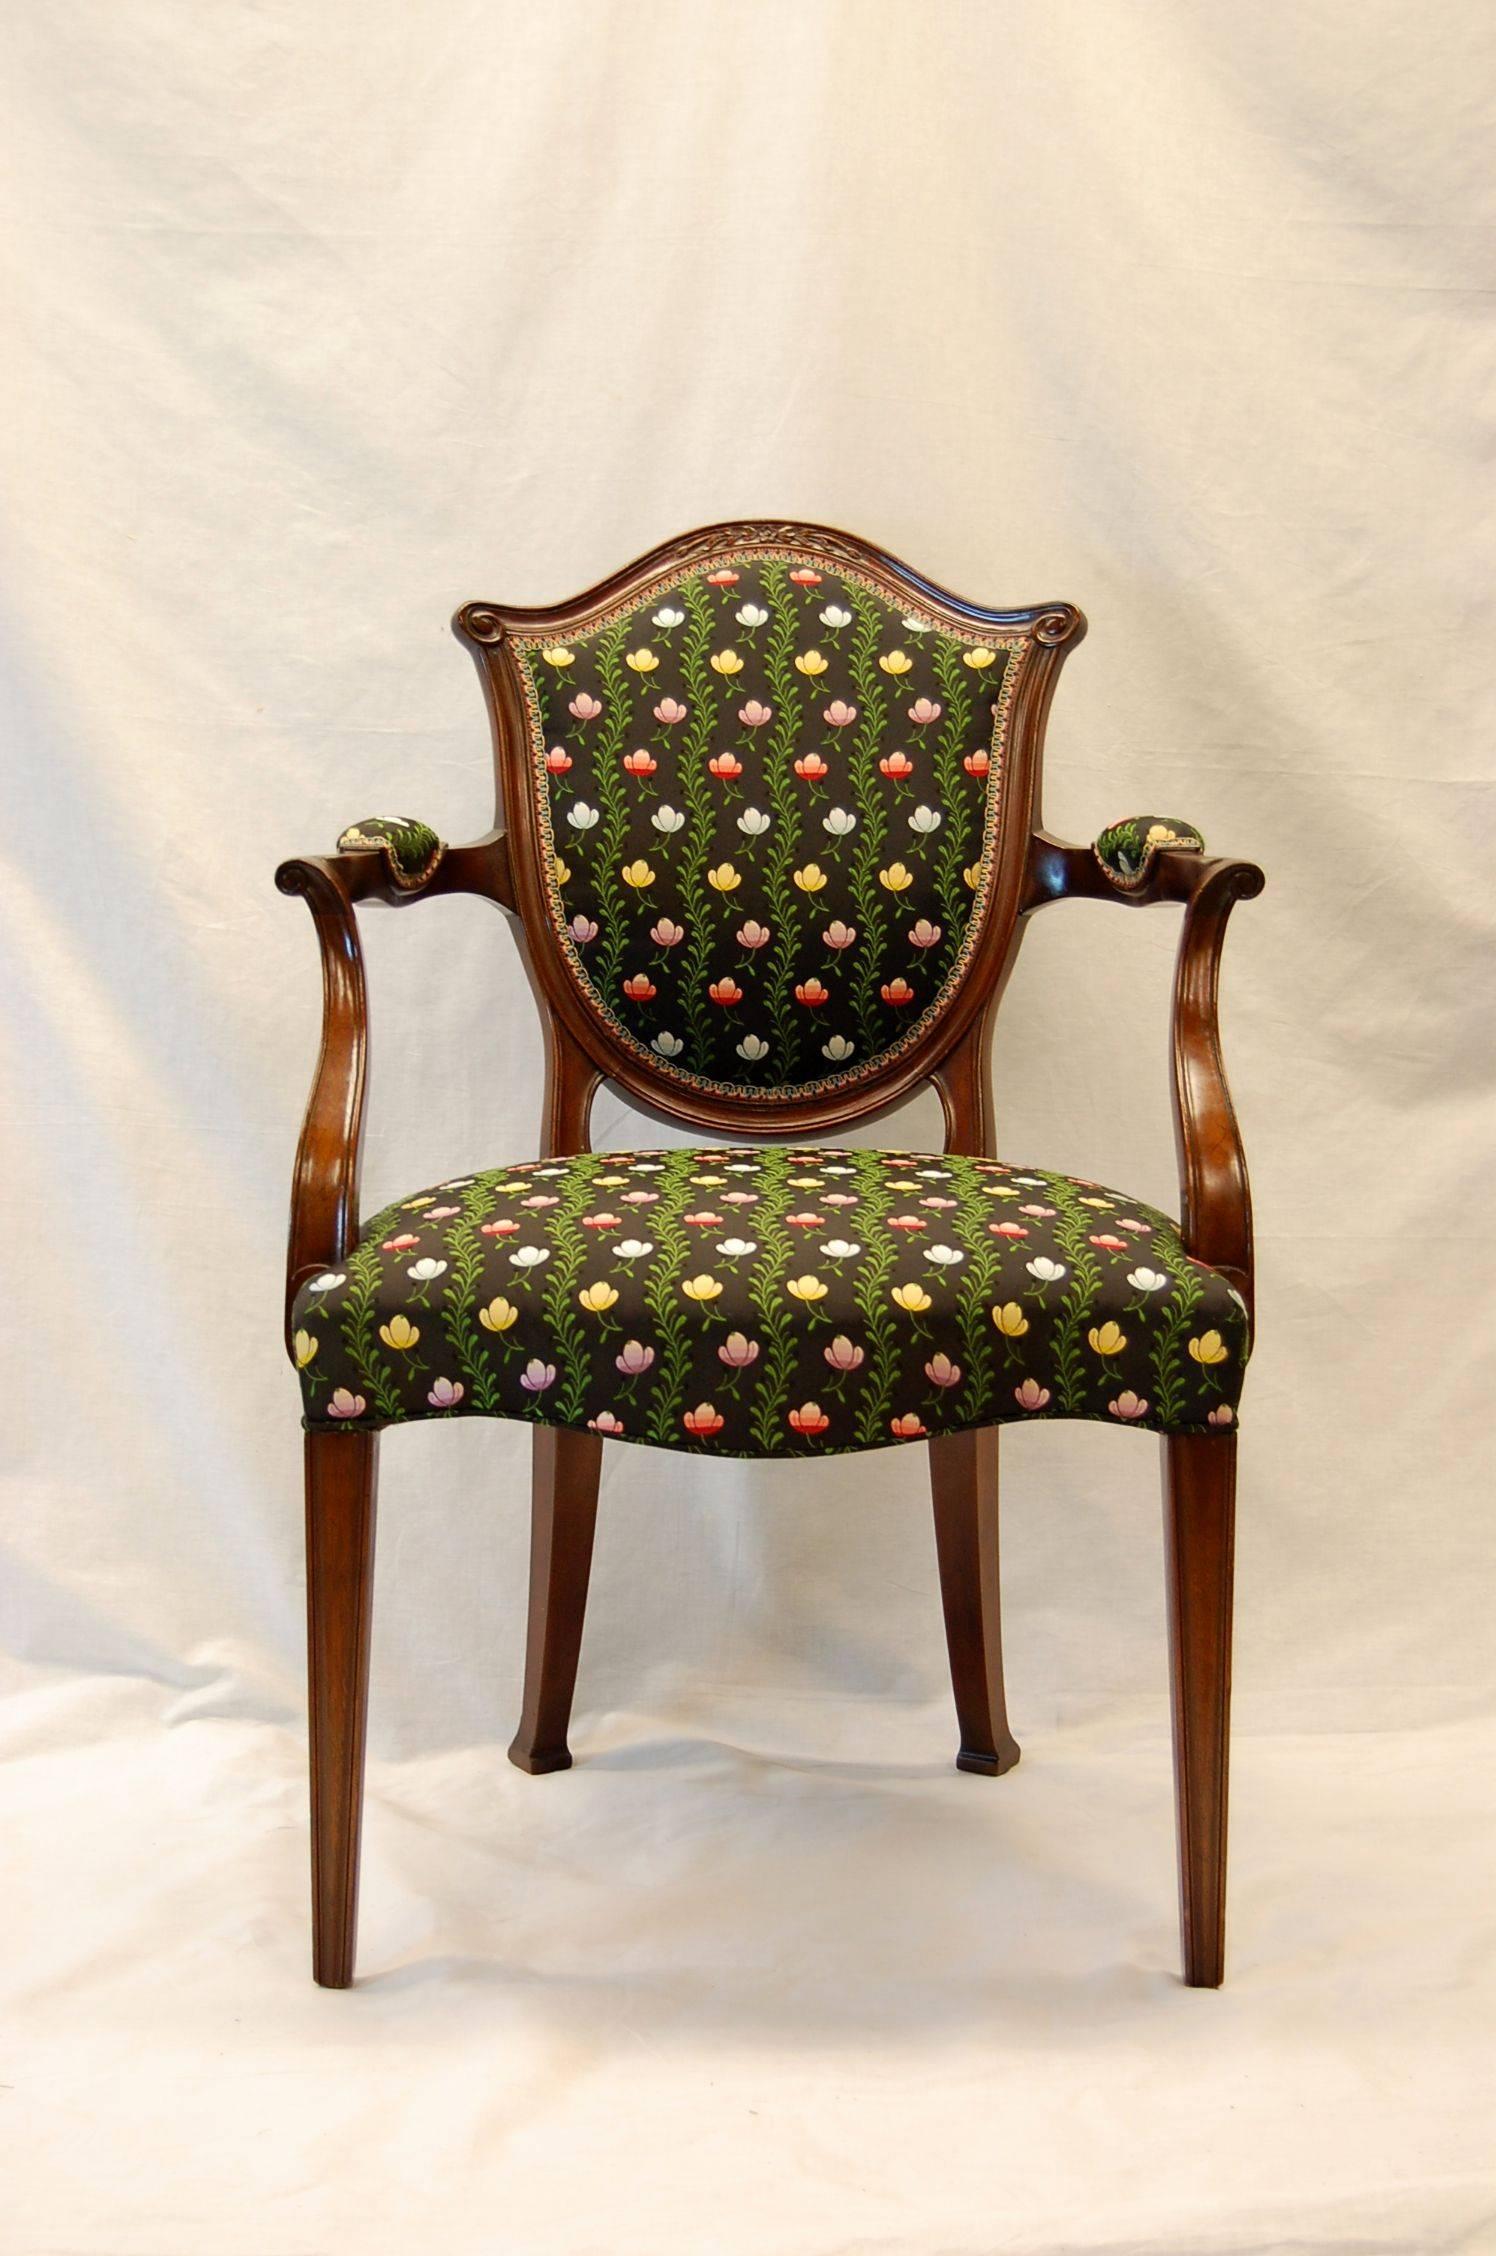 Mid-20th Century Hepplewhite Style Mahogany Open-Arm Chair Covered in Silk Brocade For Sale